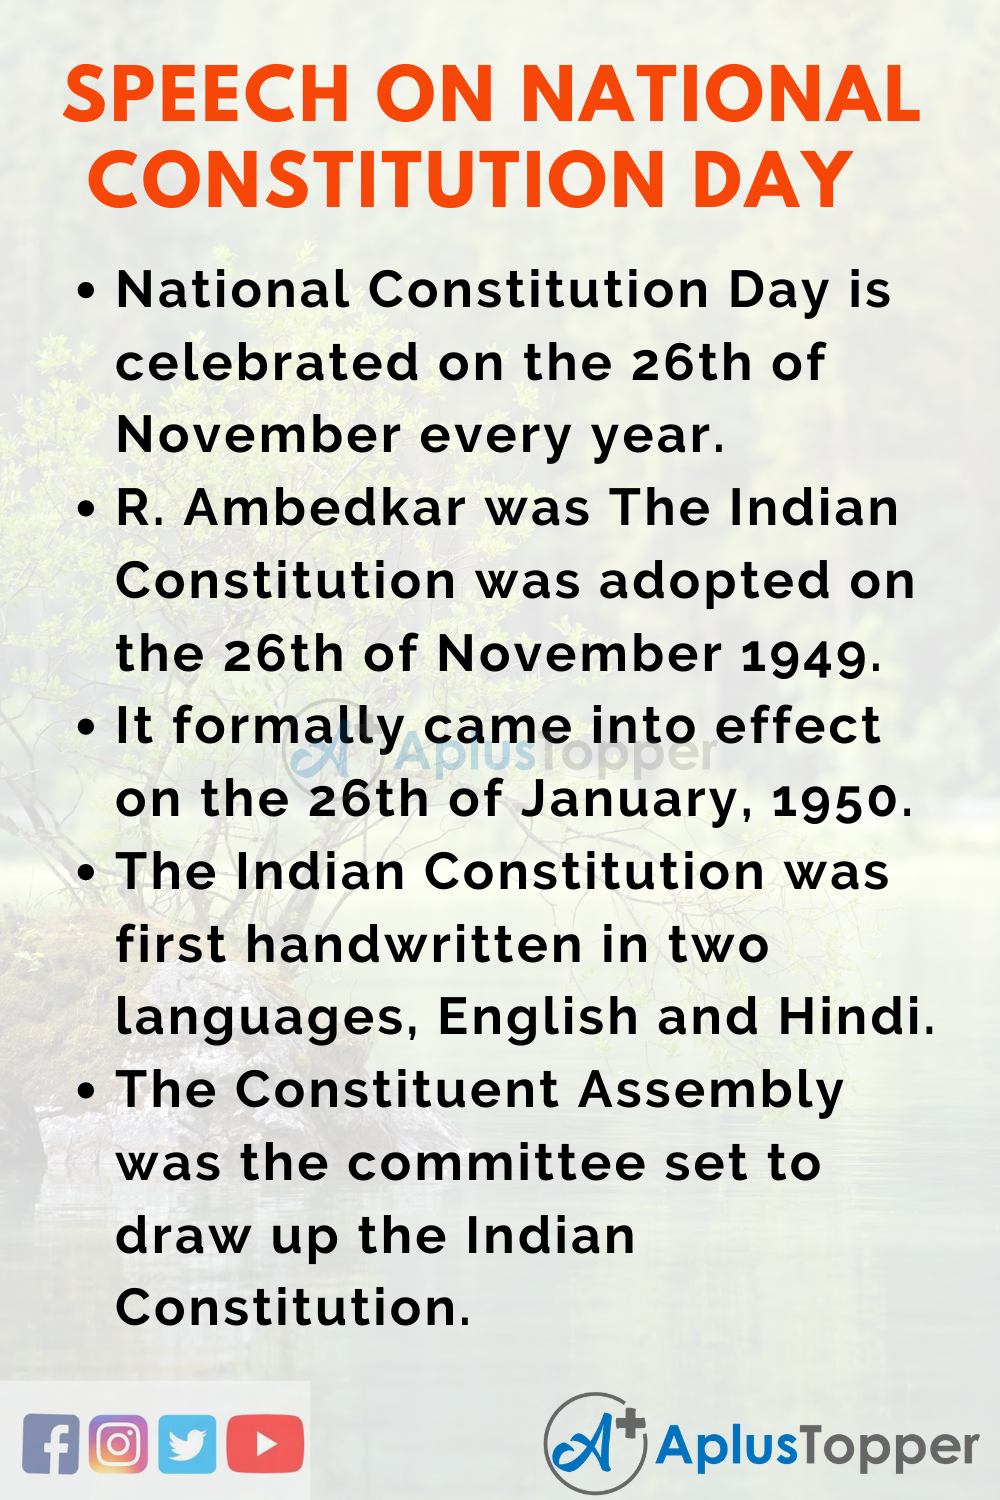 write a welcome speech on constitution day organized in your college